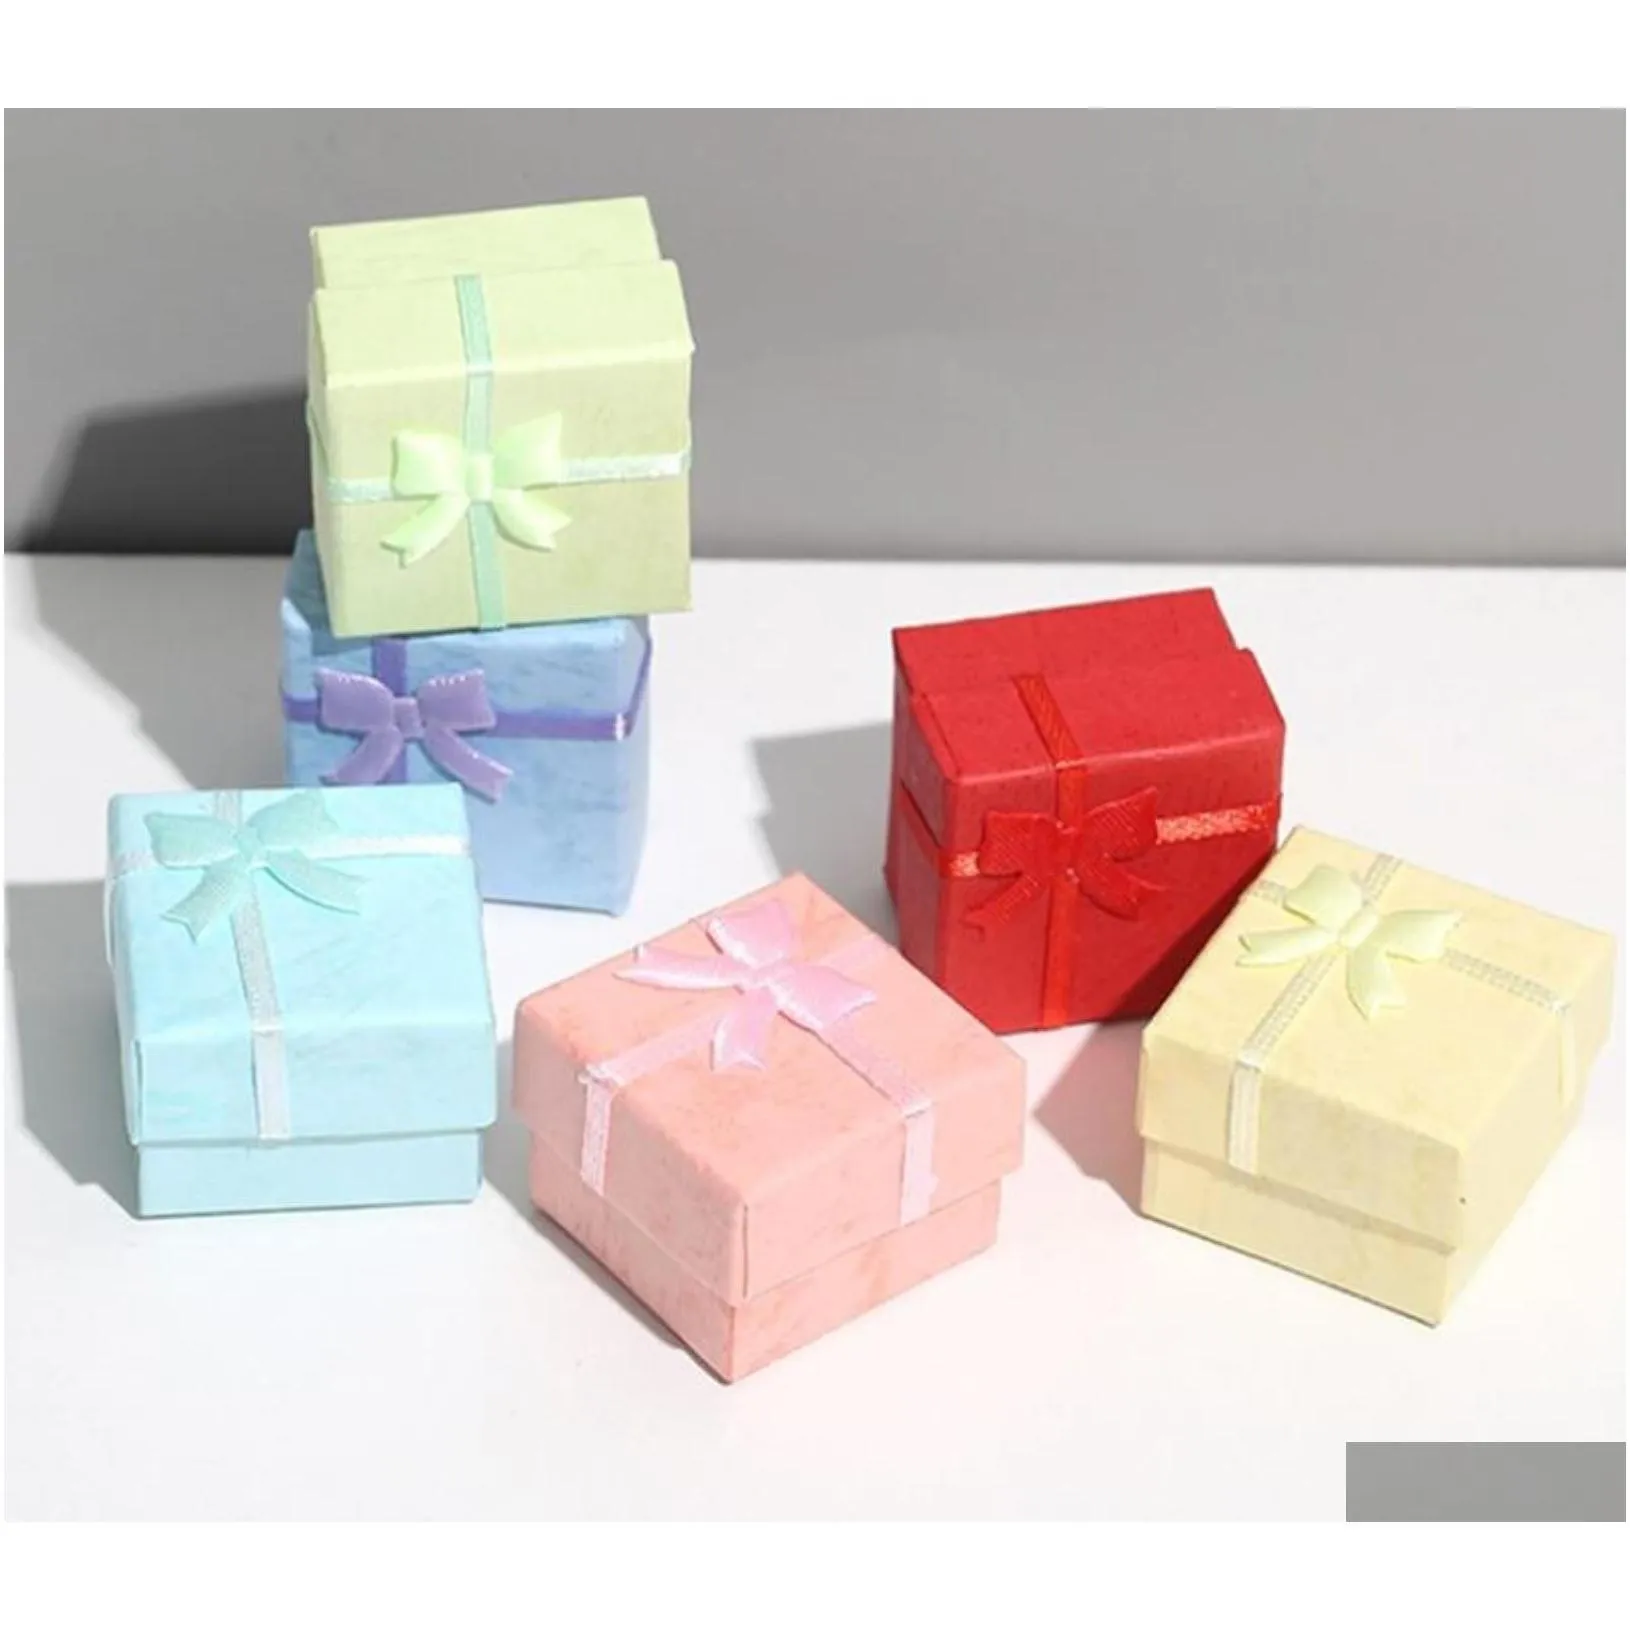 Boxes Packaging Display Jewelrywholesale 50 Pcs /Lot Square Ring Earring Necklace Jewelry Box Gift Present Case Holder Set W334 Ayepd